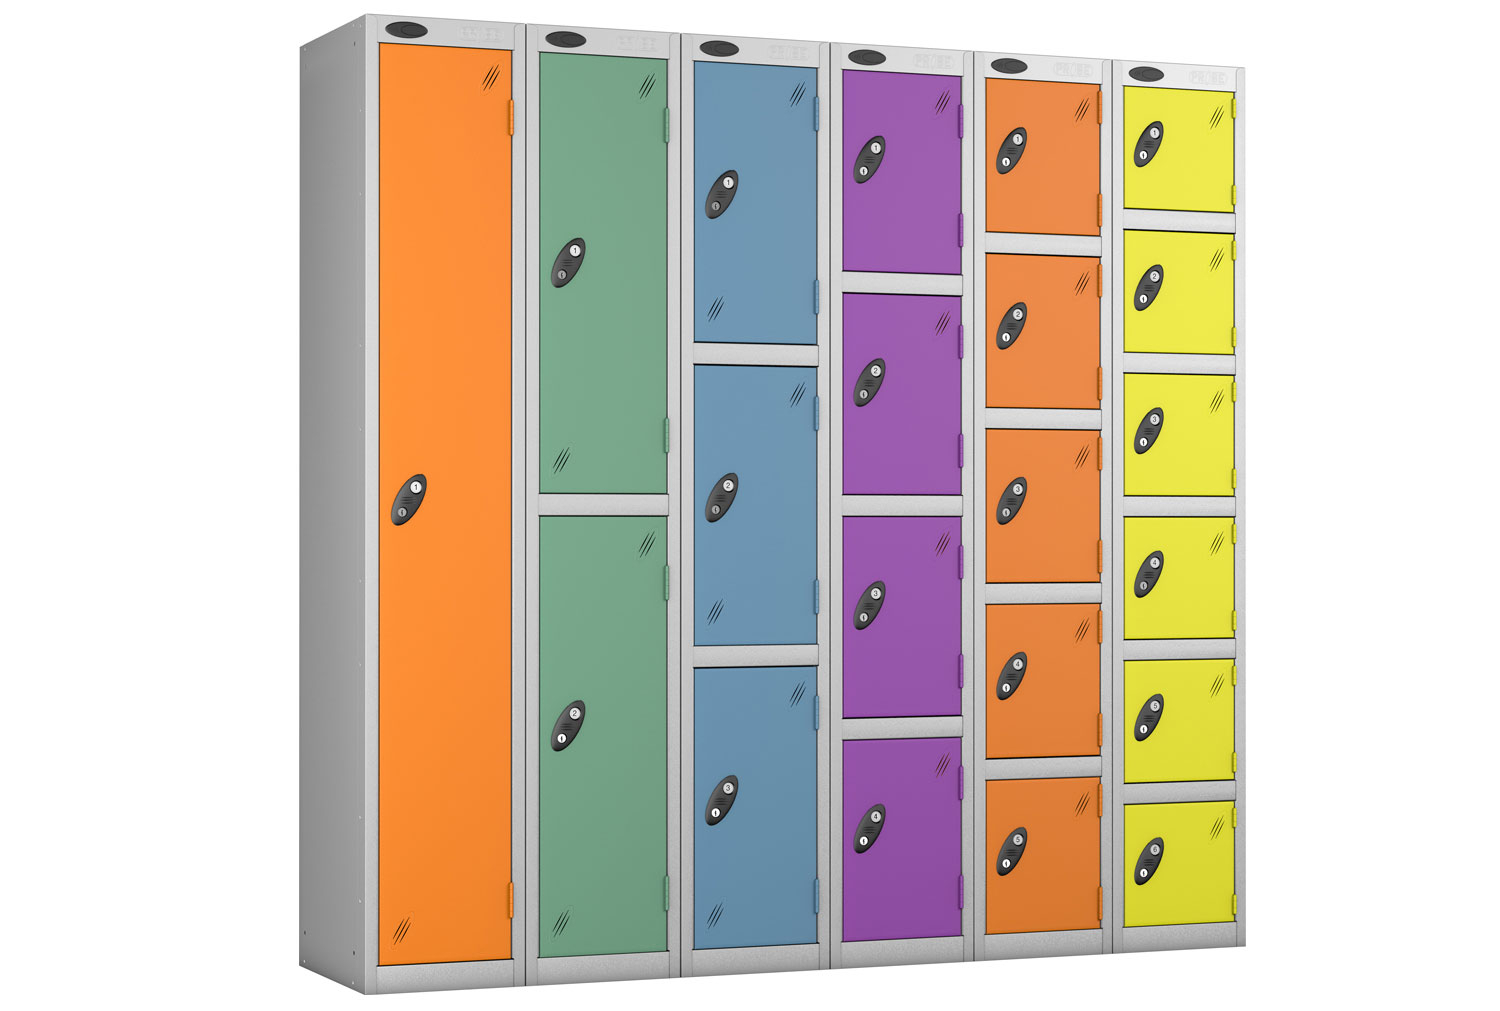 Probe Autumn Colour Lockers With Silver Body, 3 Door, 31wx31dx178h (cm), Cam Lock, Silver Body, Lilac